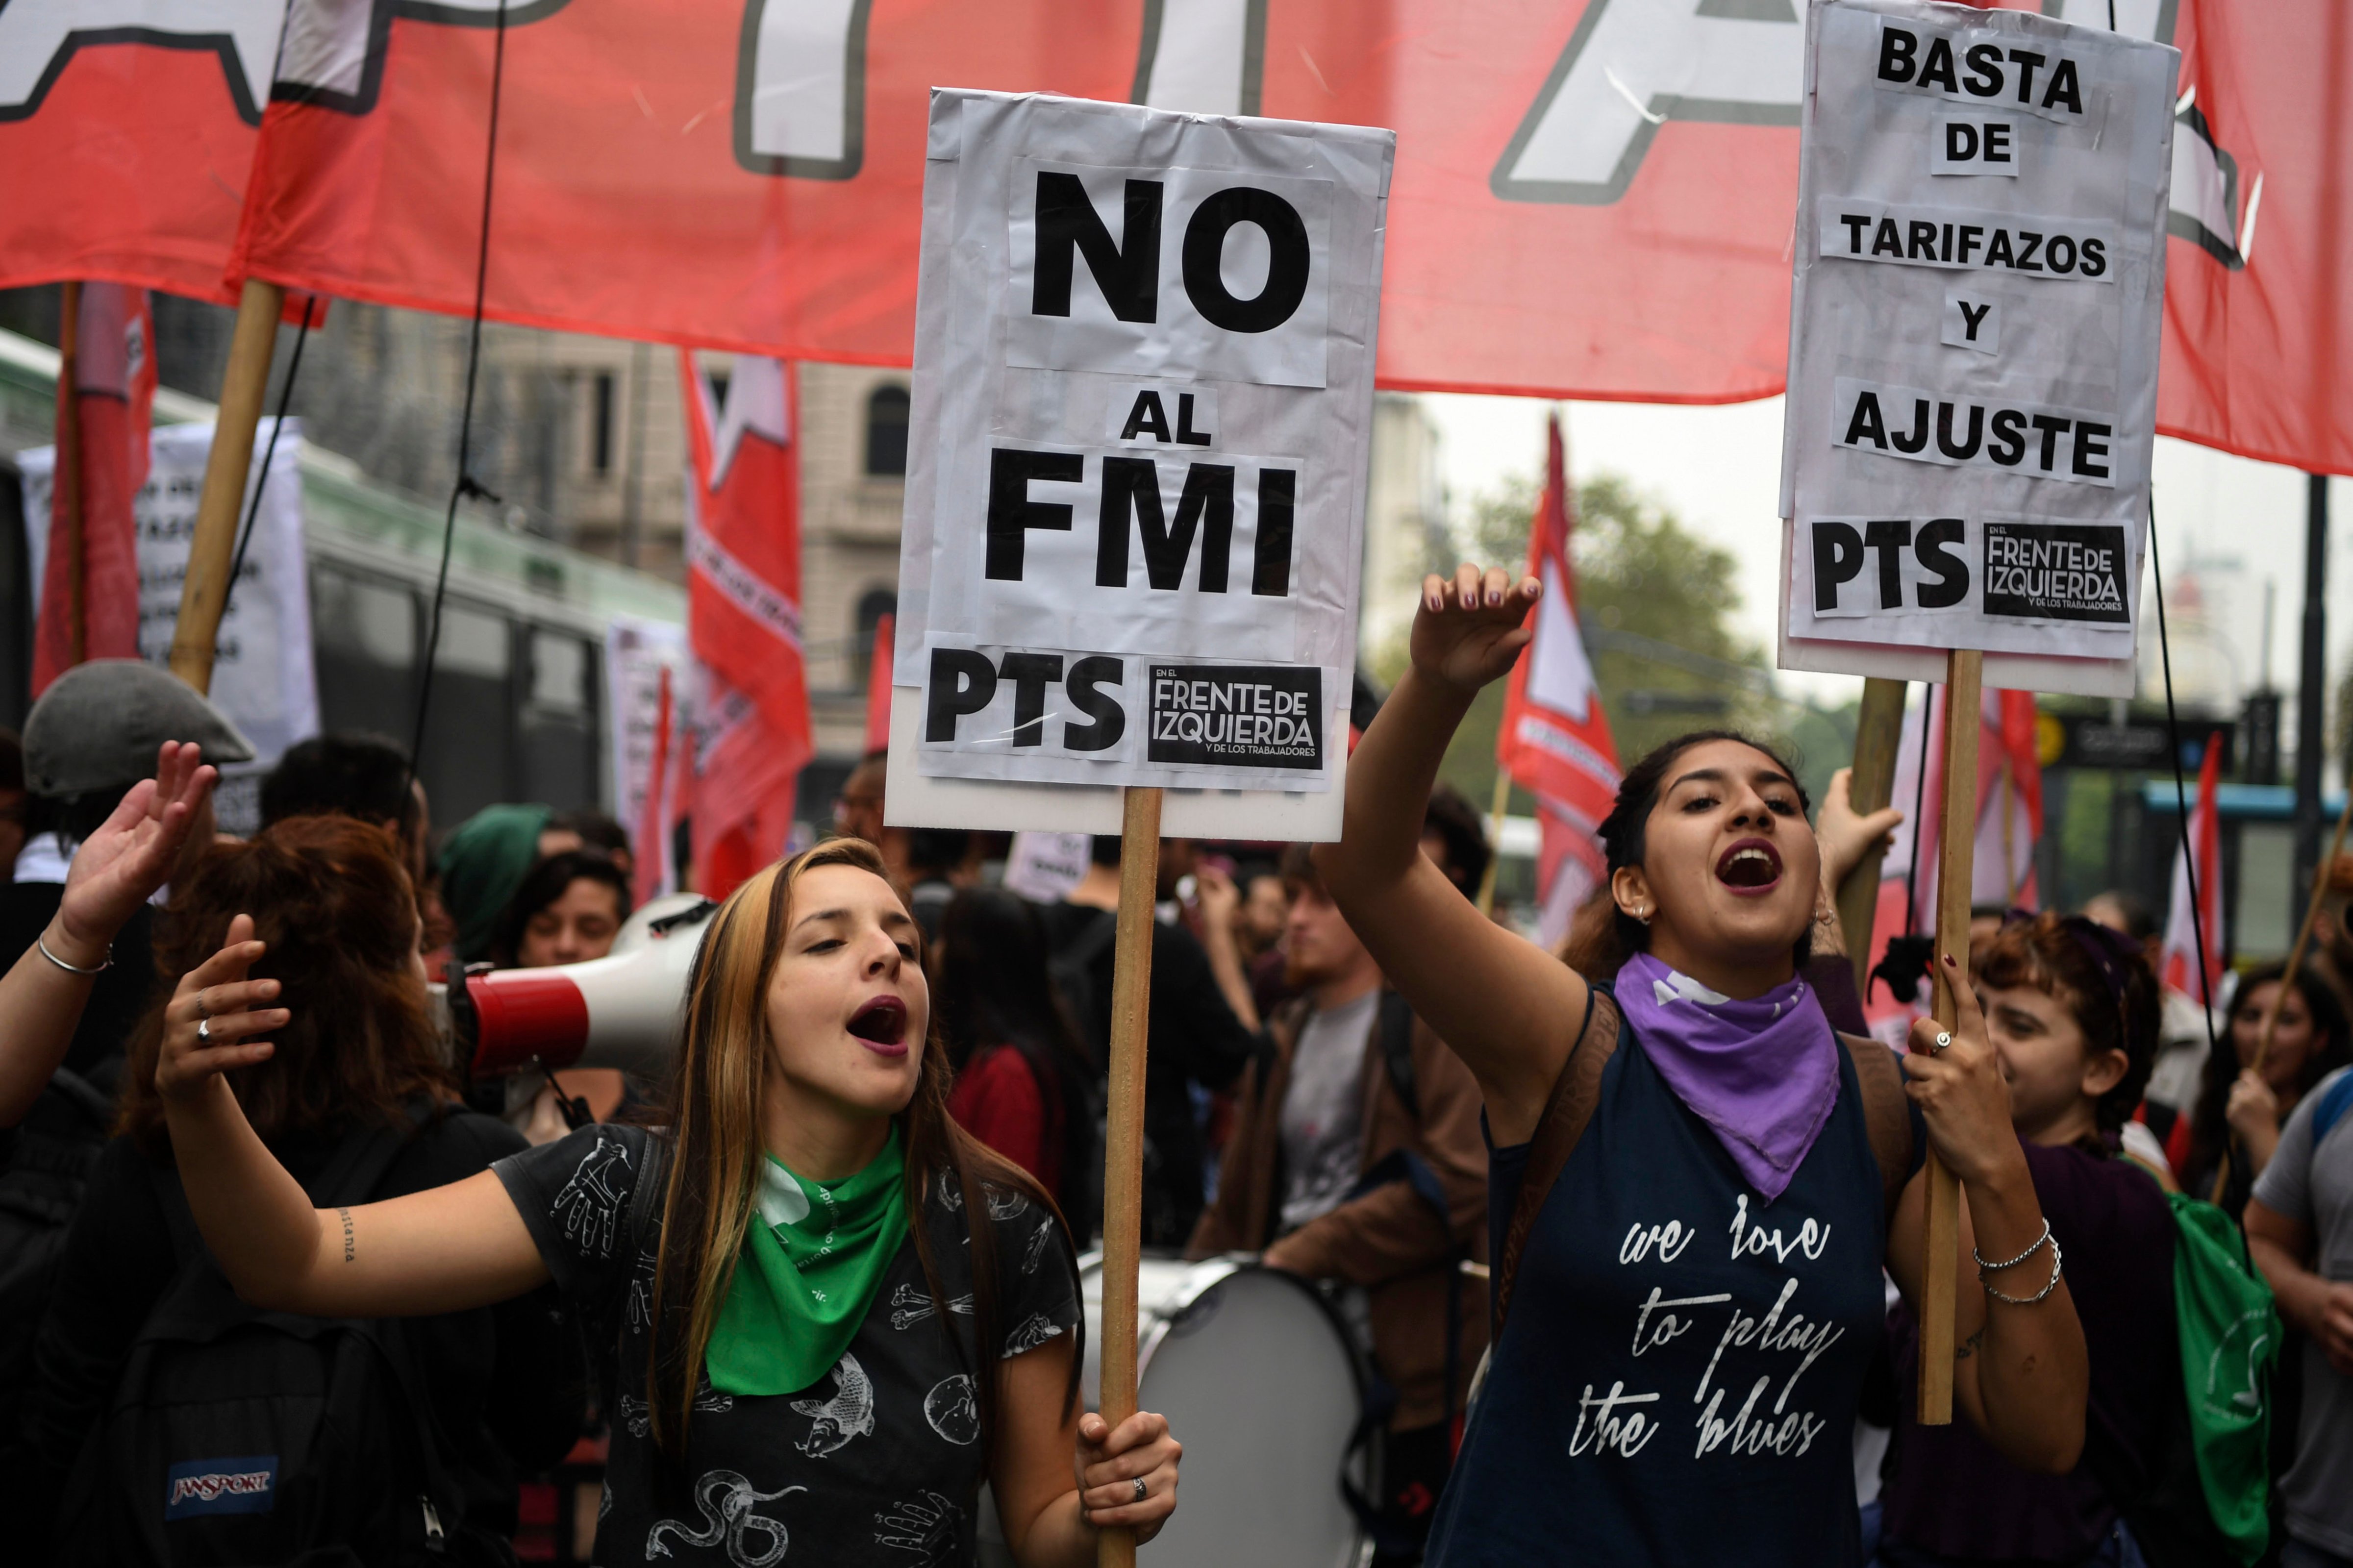 Members of leftist organizations demonstrate outside the National Congress against the government's negotiations with the IMF while legislators debate a bill to put a stop on public services taxes raising in Buenos Aires, on May 09, 2018. - Argentina opened talks with the International Monetary Fund on Tuesday to seek a financial aid package, 17 years after the country defaulted on its debt and 12 years after cutting ties with the fund. (Photo by EITAN ABRAMOVICH / AFP)        (Photo credit should read EITAN ABRAMOVICH/AFP/Getty Images) (EITAN ABRAMOVICH—AFP/Getty Images)